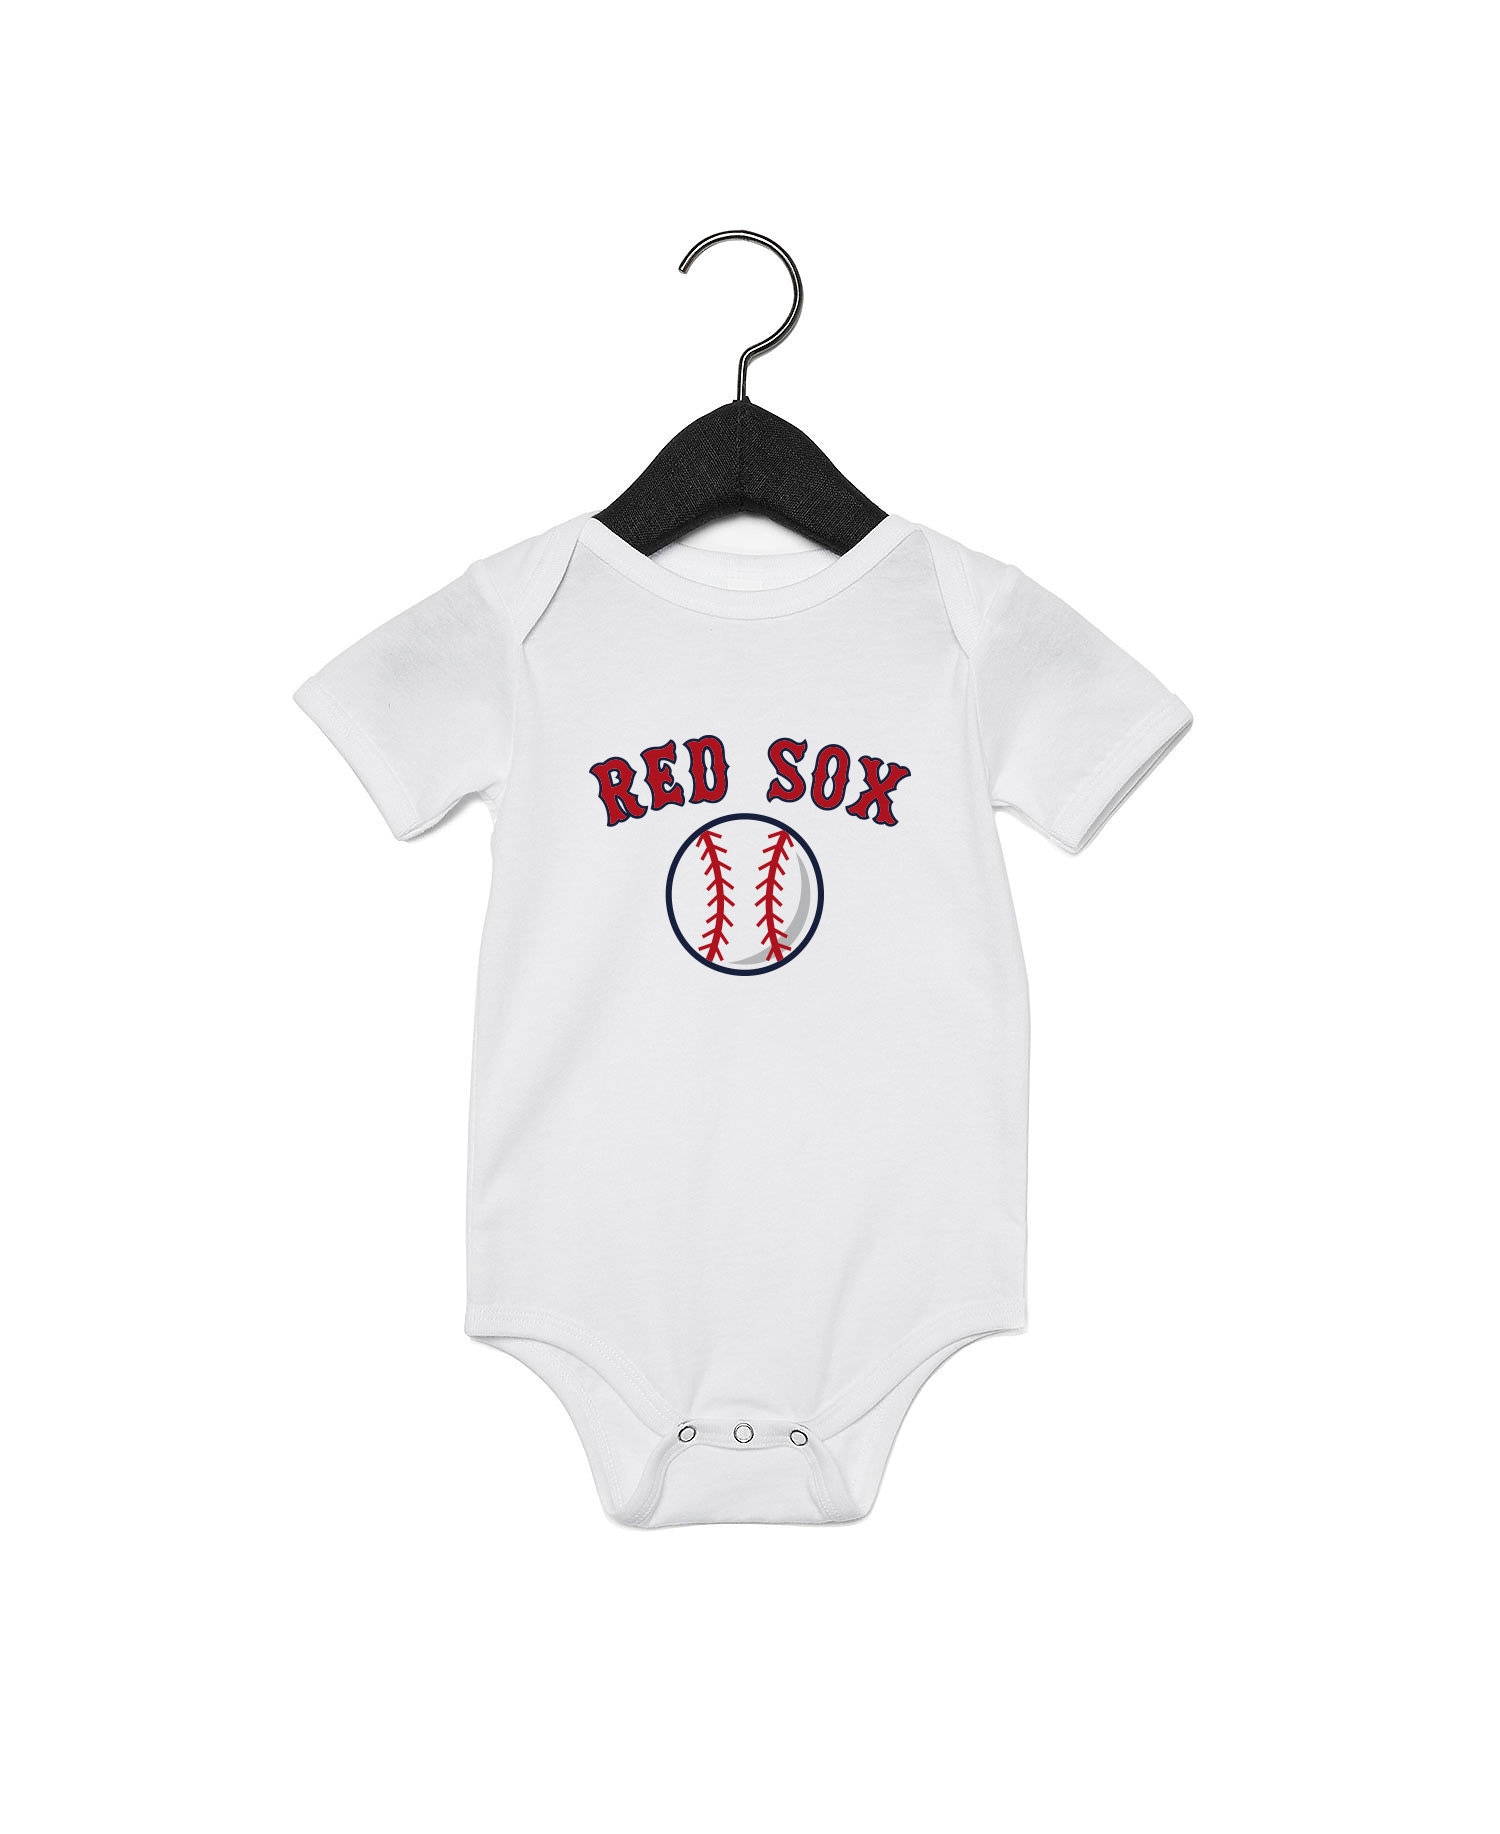 Red Sox Baseball Quote Baby Bodysuit White ( R Feb 28)